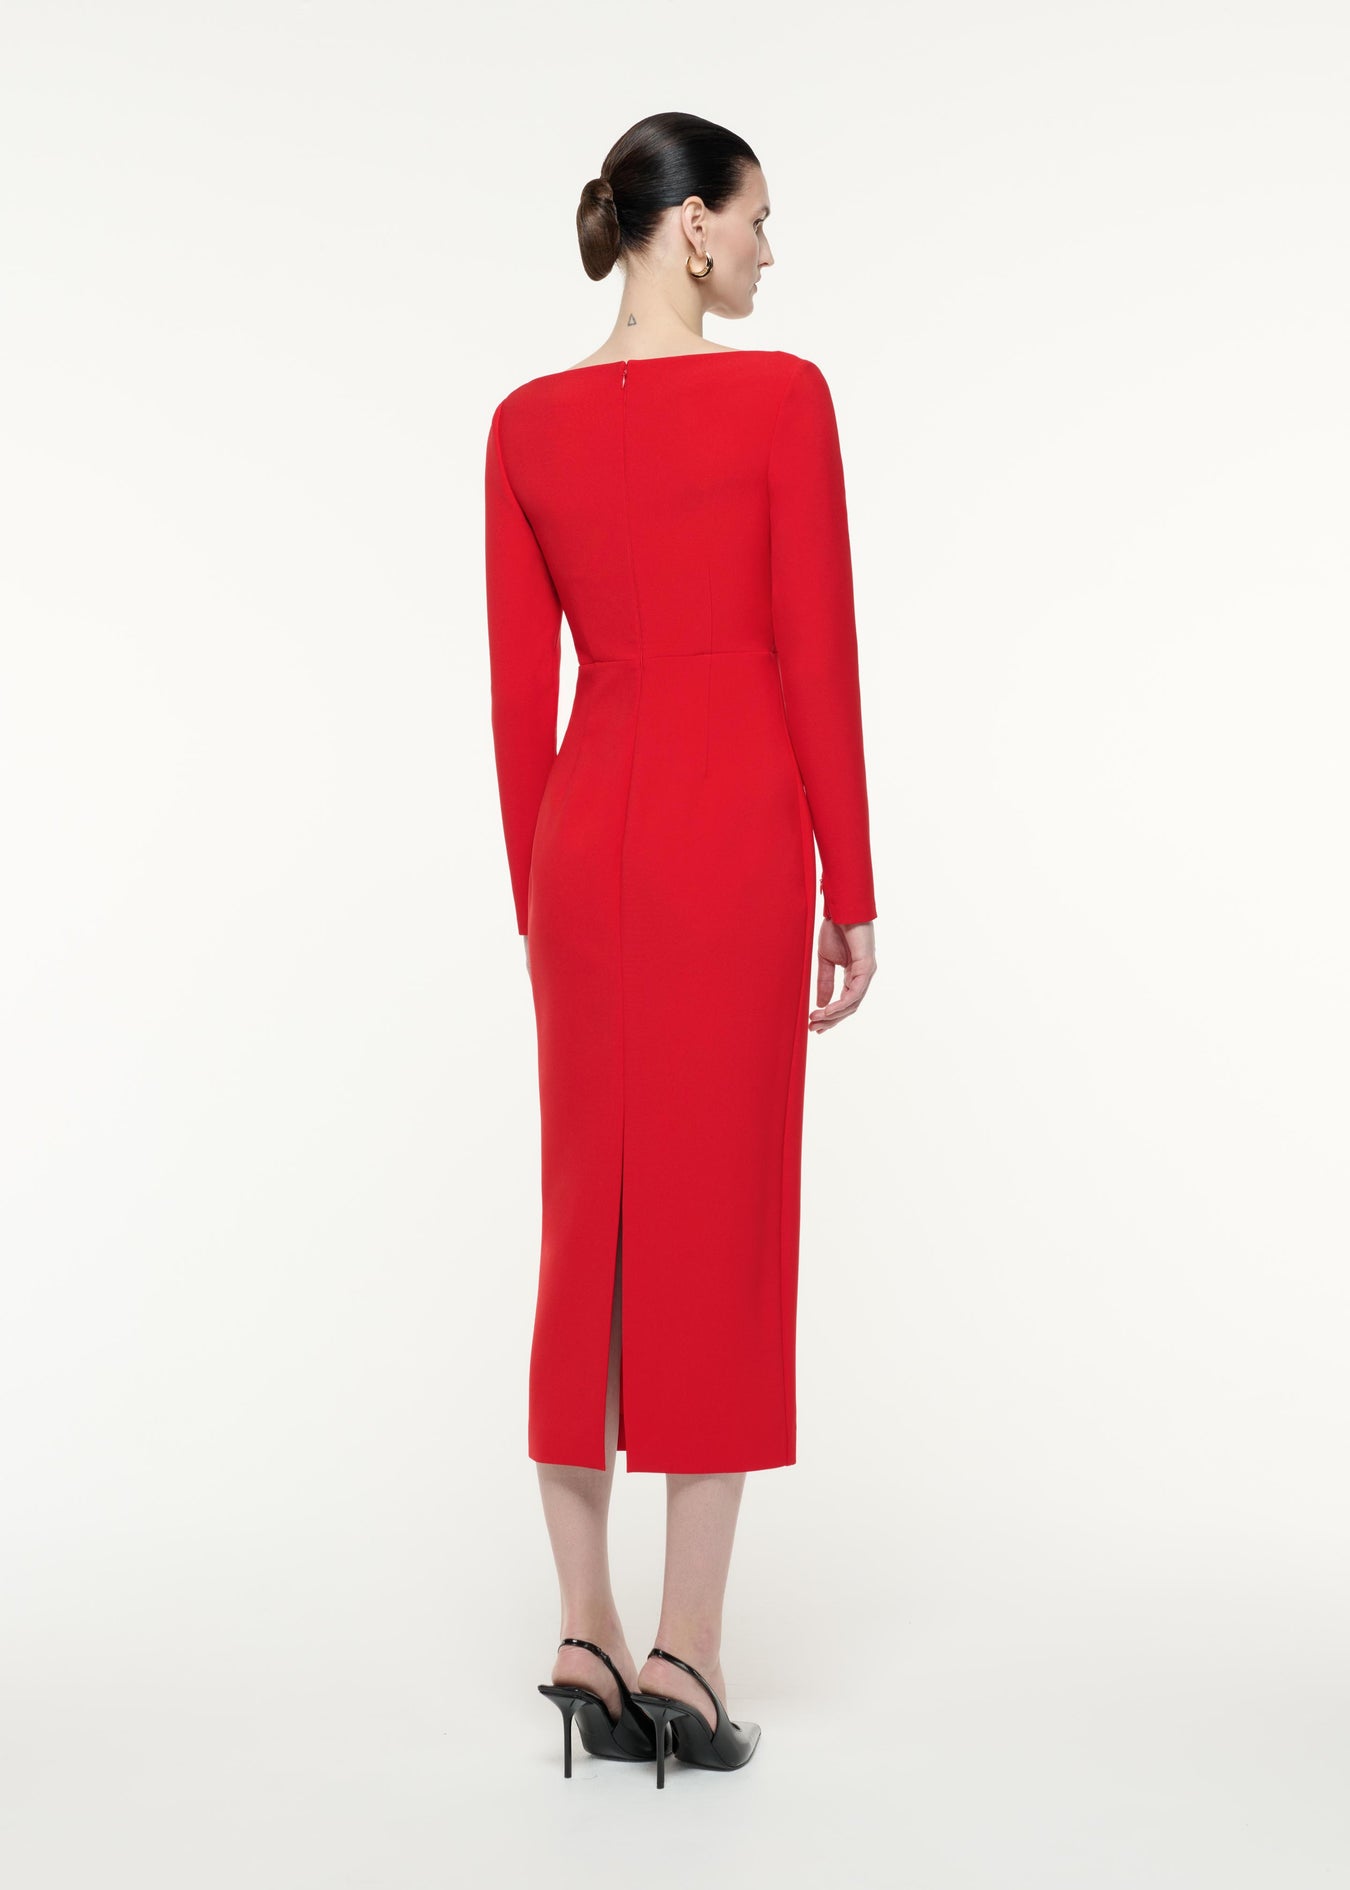 A back view image of a model wearing the Long Sleeve Crepe Midi Dress in Red